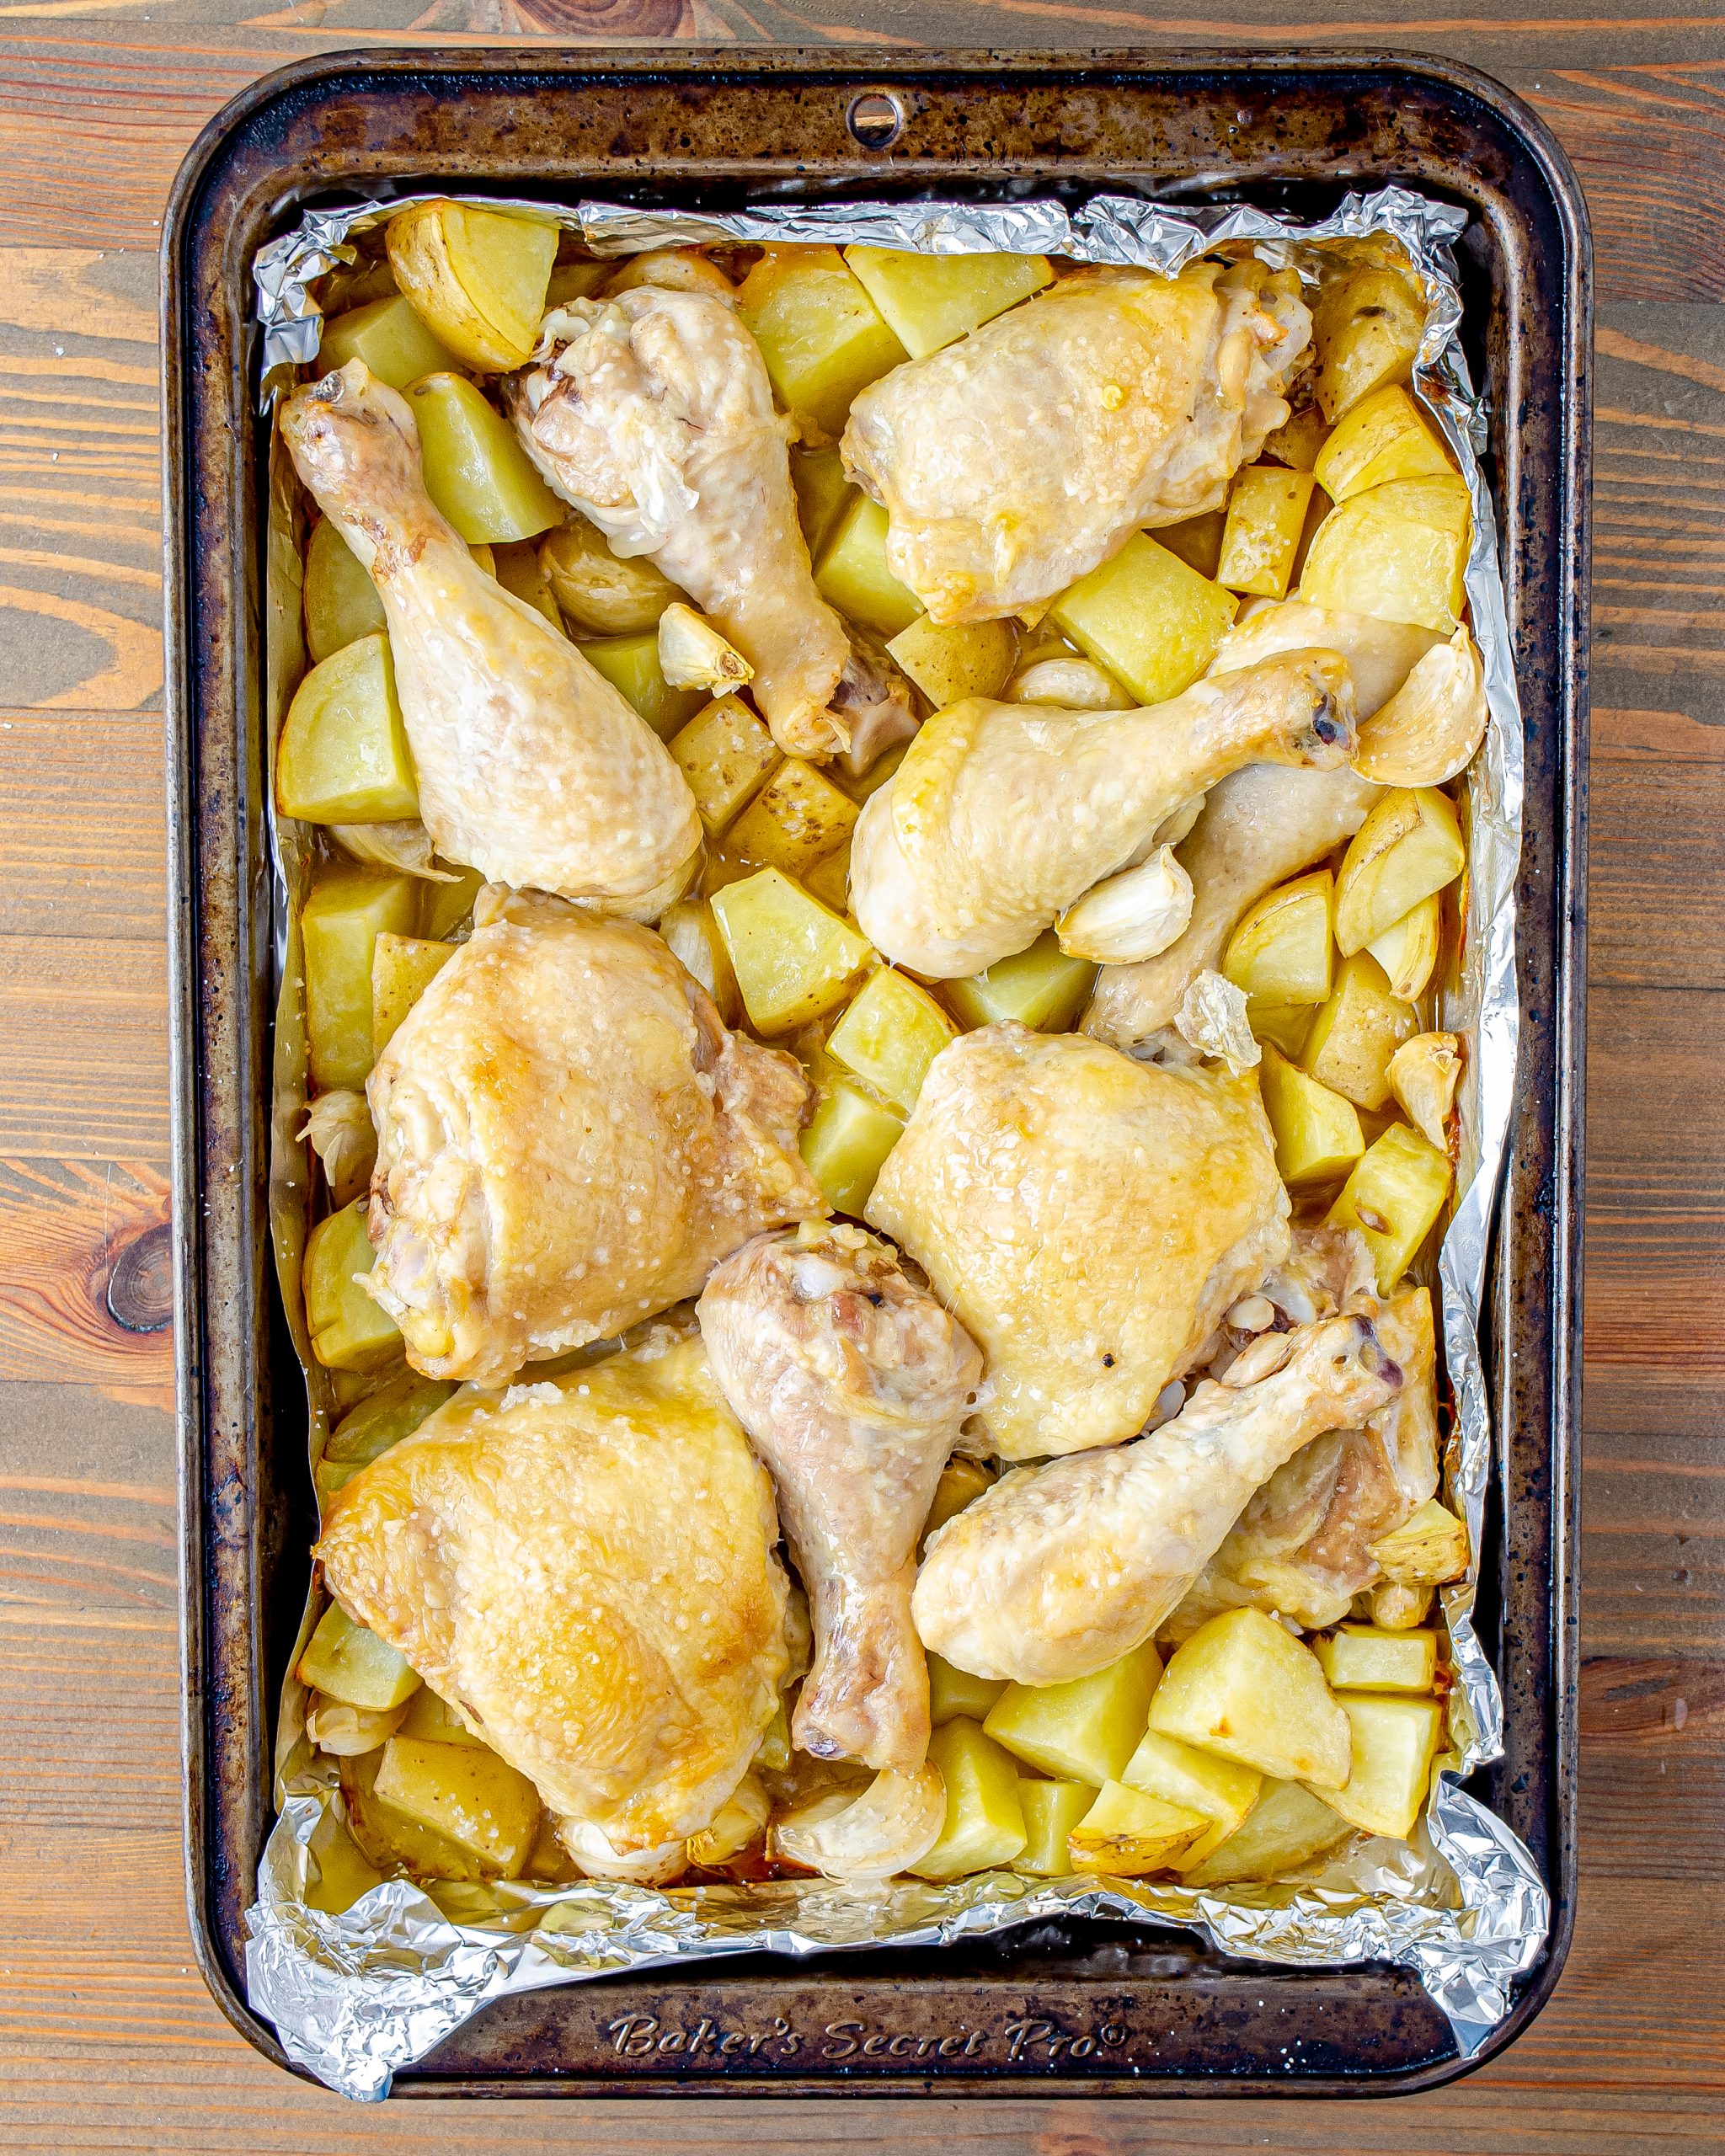 Add the potatoes, garlic, and chicken to the baking dish.